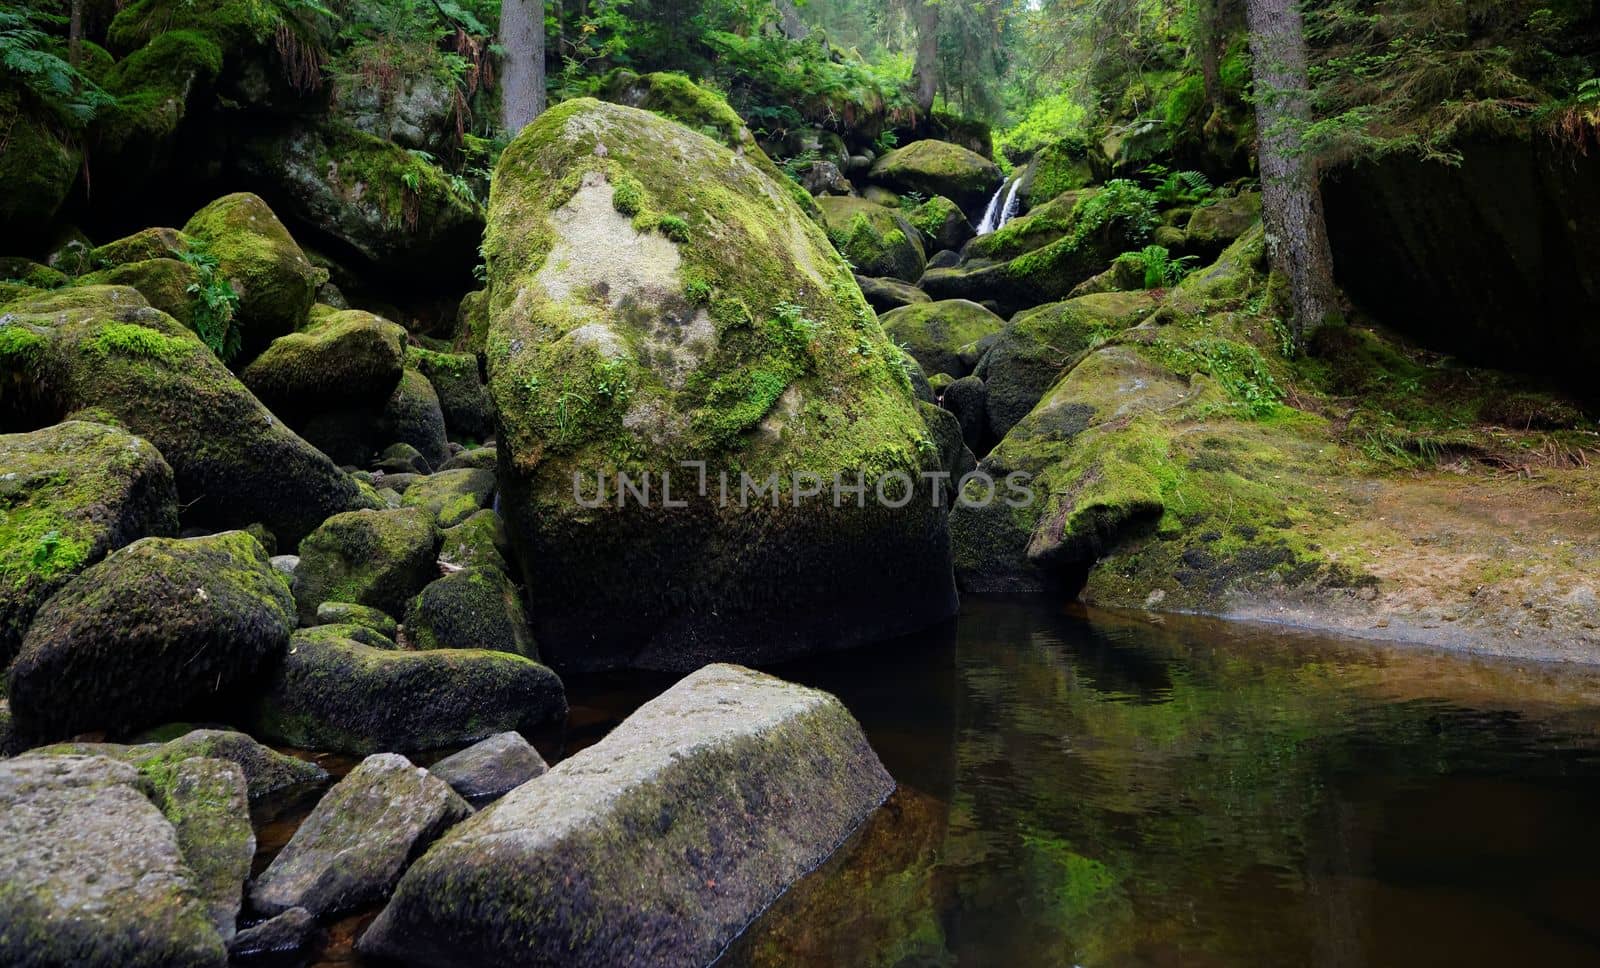 Moss and lichen covered boulders in Triberg waterfall in Germany